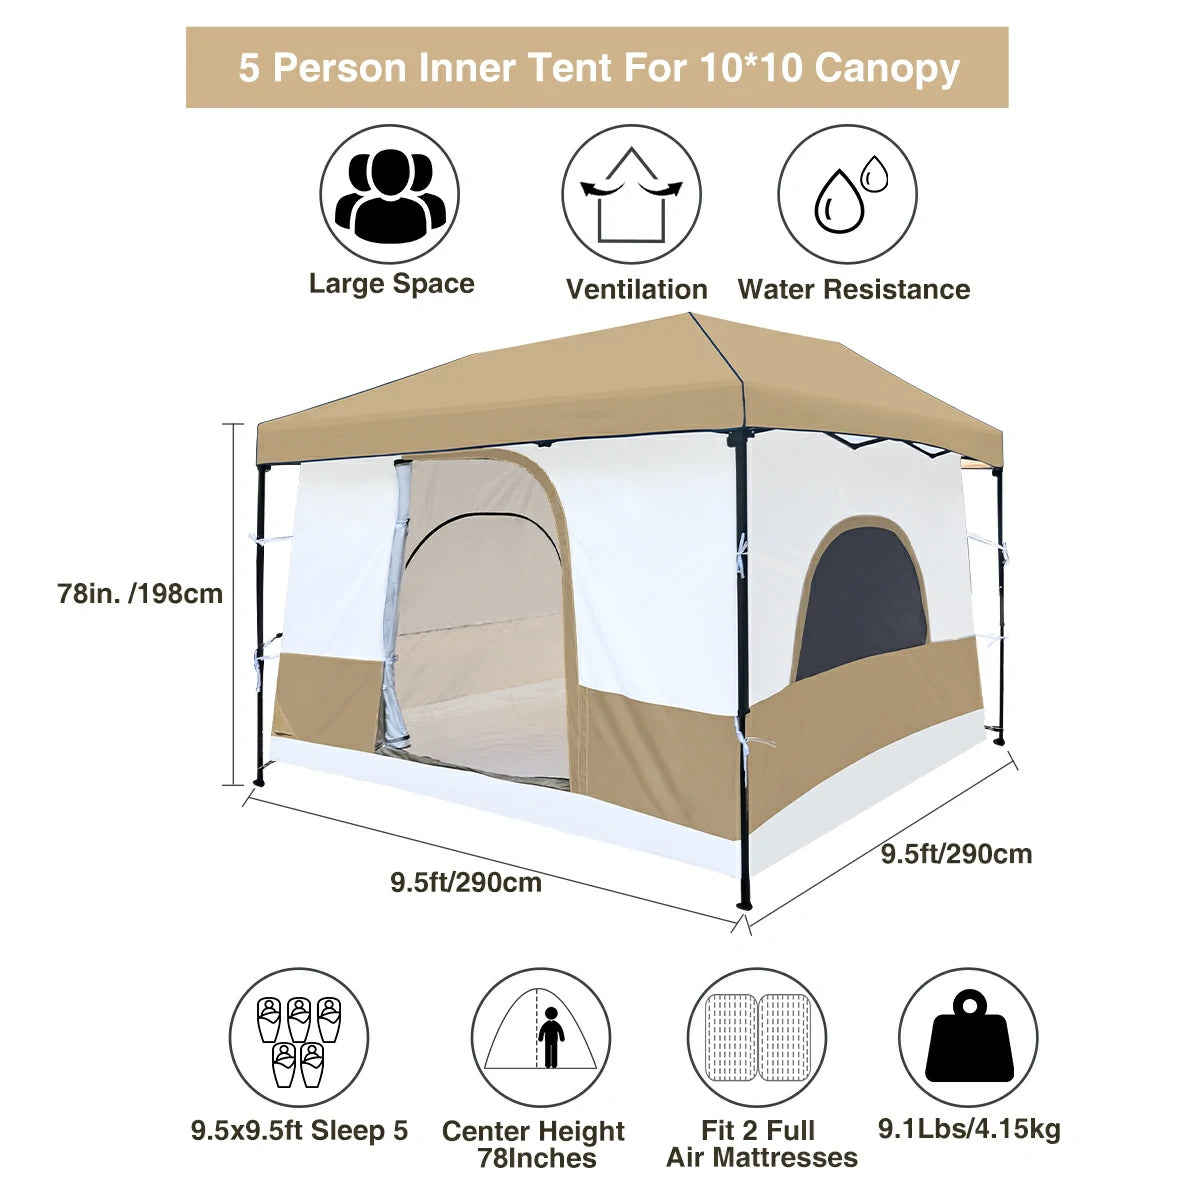 10'x10' Camping Cube Tent for Pop Up Canopy (Canopy & Frame NOT Included)